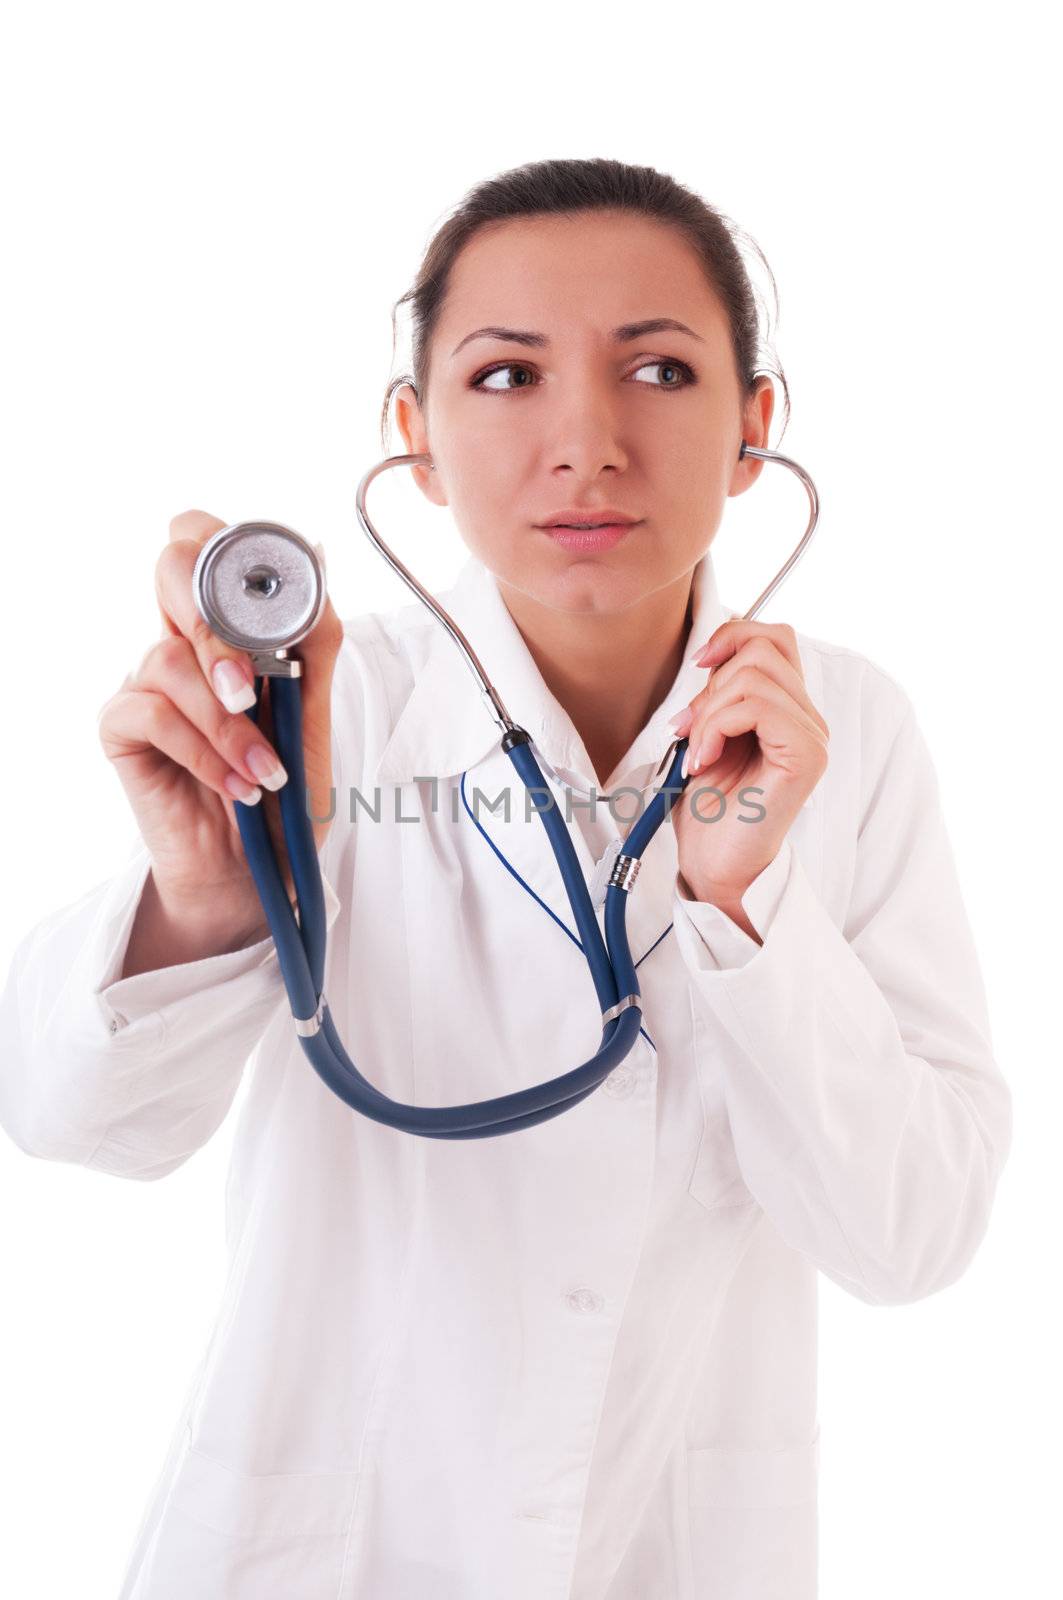 Serious doctor listen with stethoscope isolated on white background. Focus on the doctor